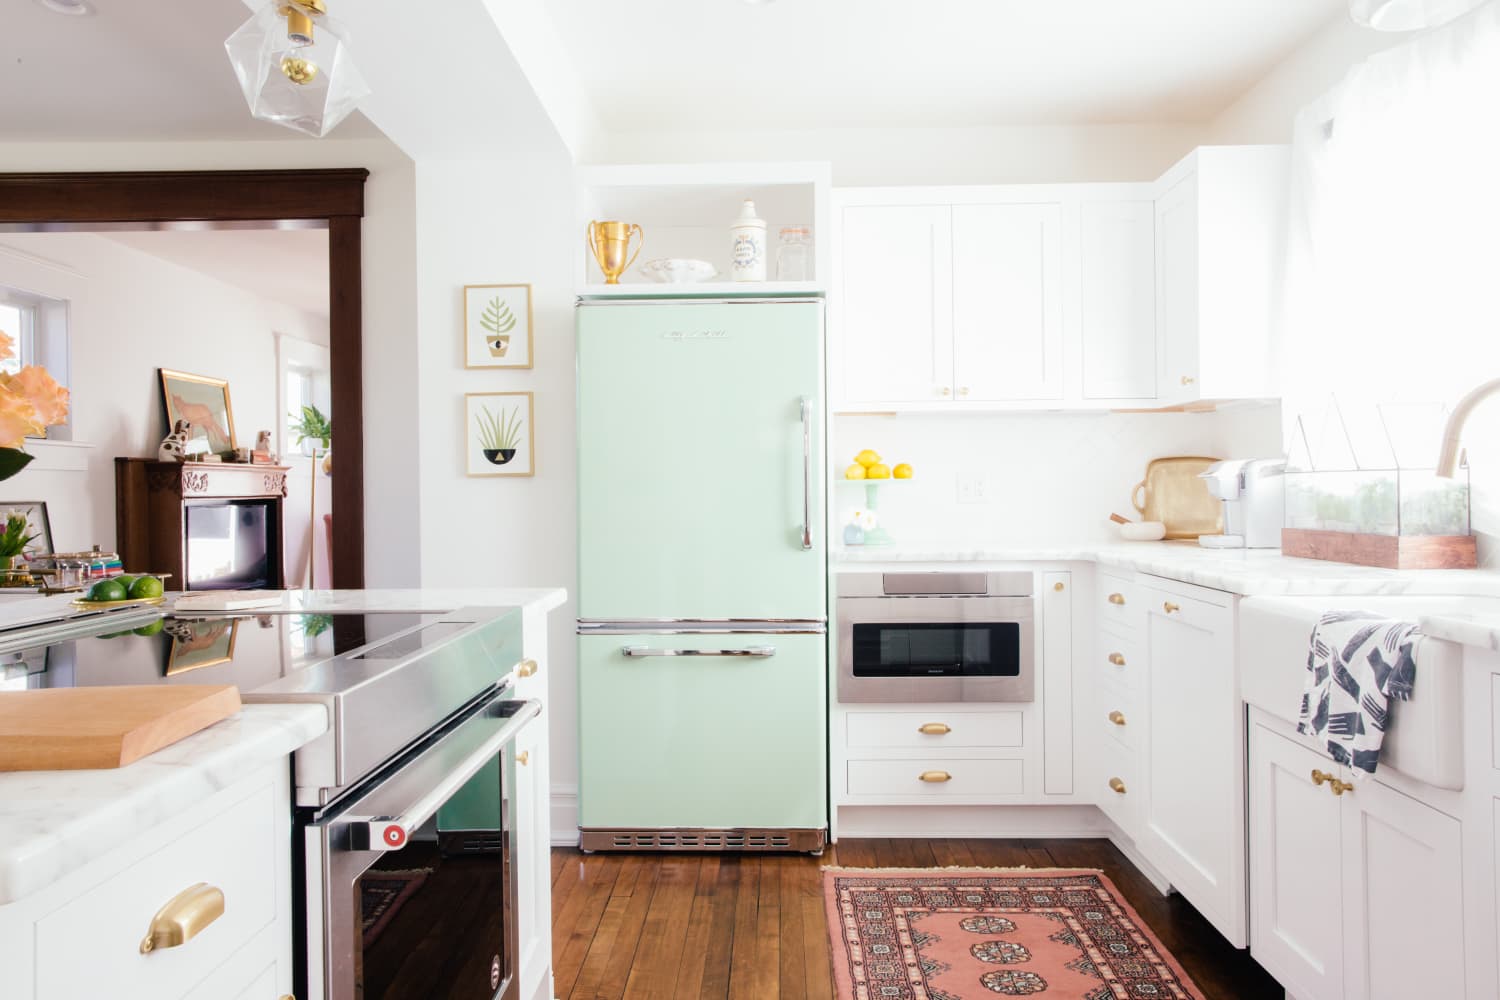 The Kitchen Work Triangle: As Seen In Real Kitchens! | Kitchn